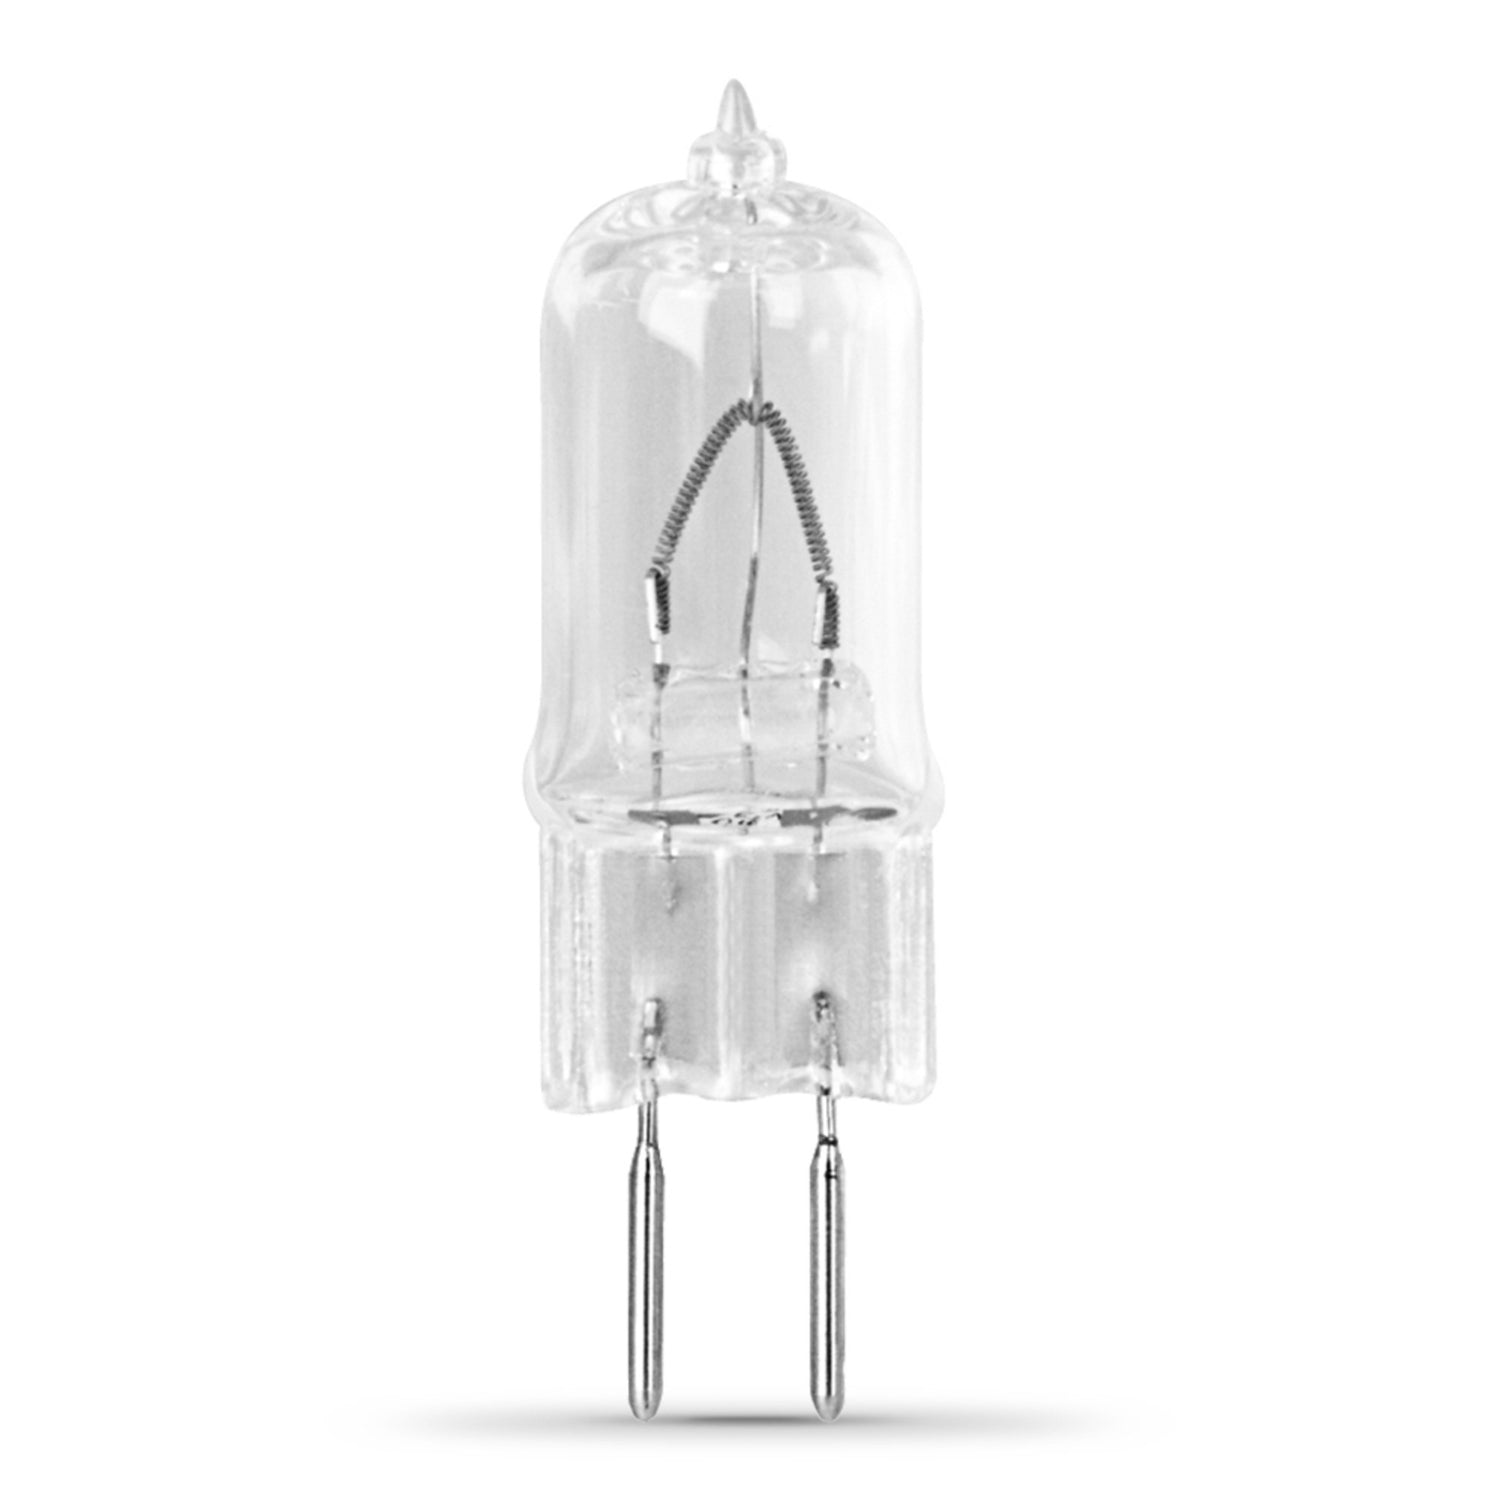 100W Warm White (3000K) Bi-Pin GY6.35 Base (T4 Replacement) Halogen Replacement Light Bulb